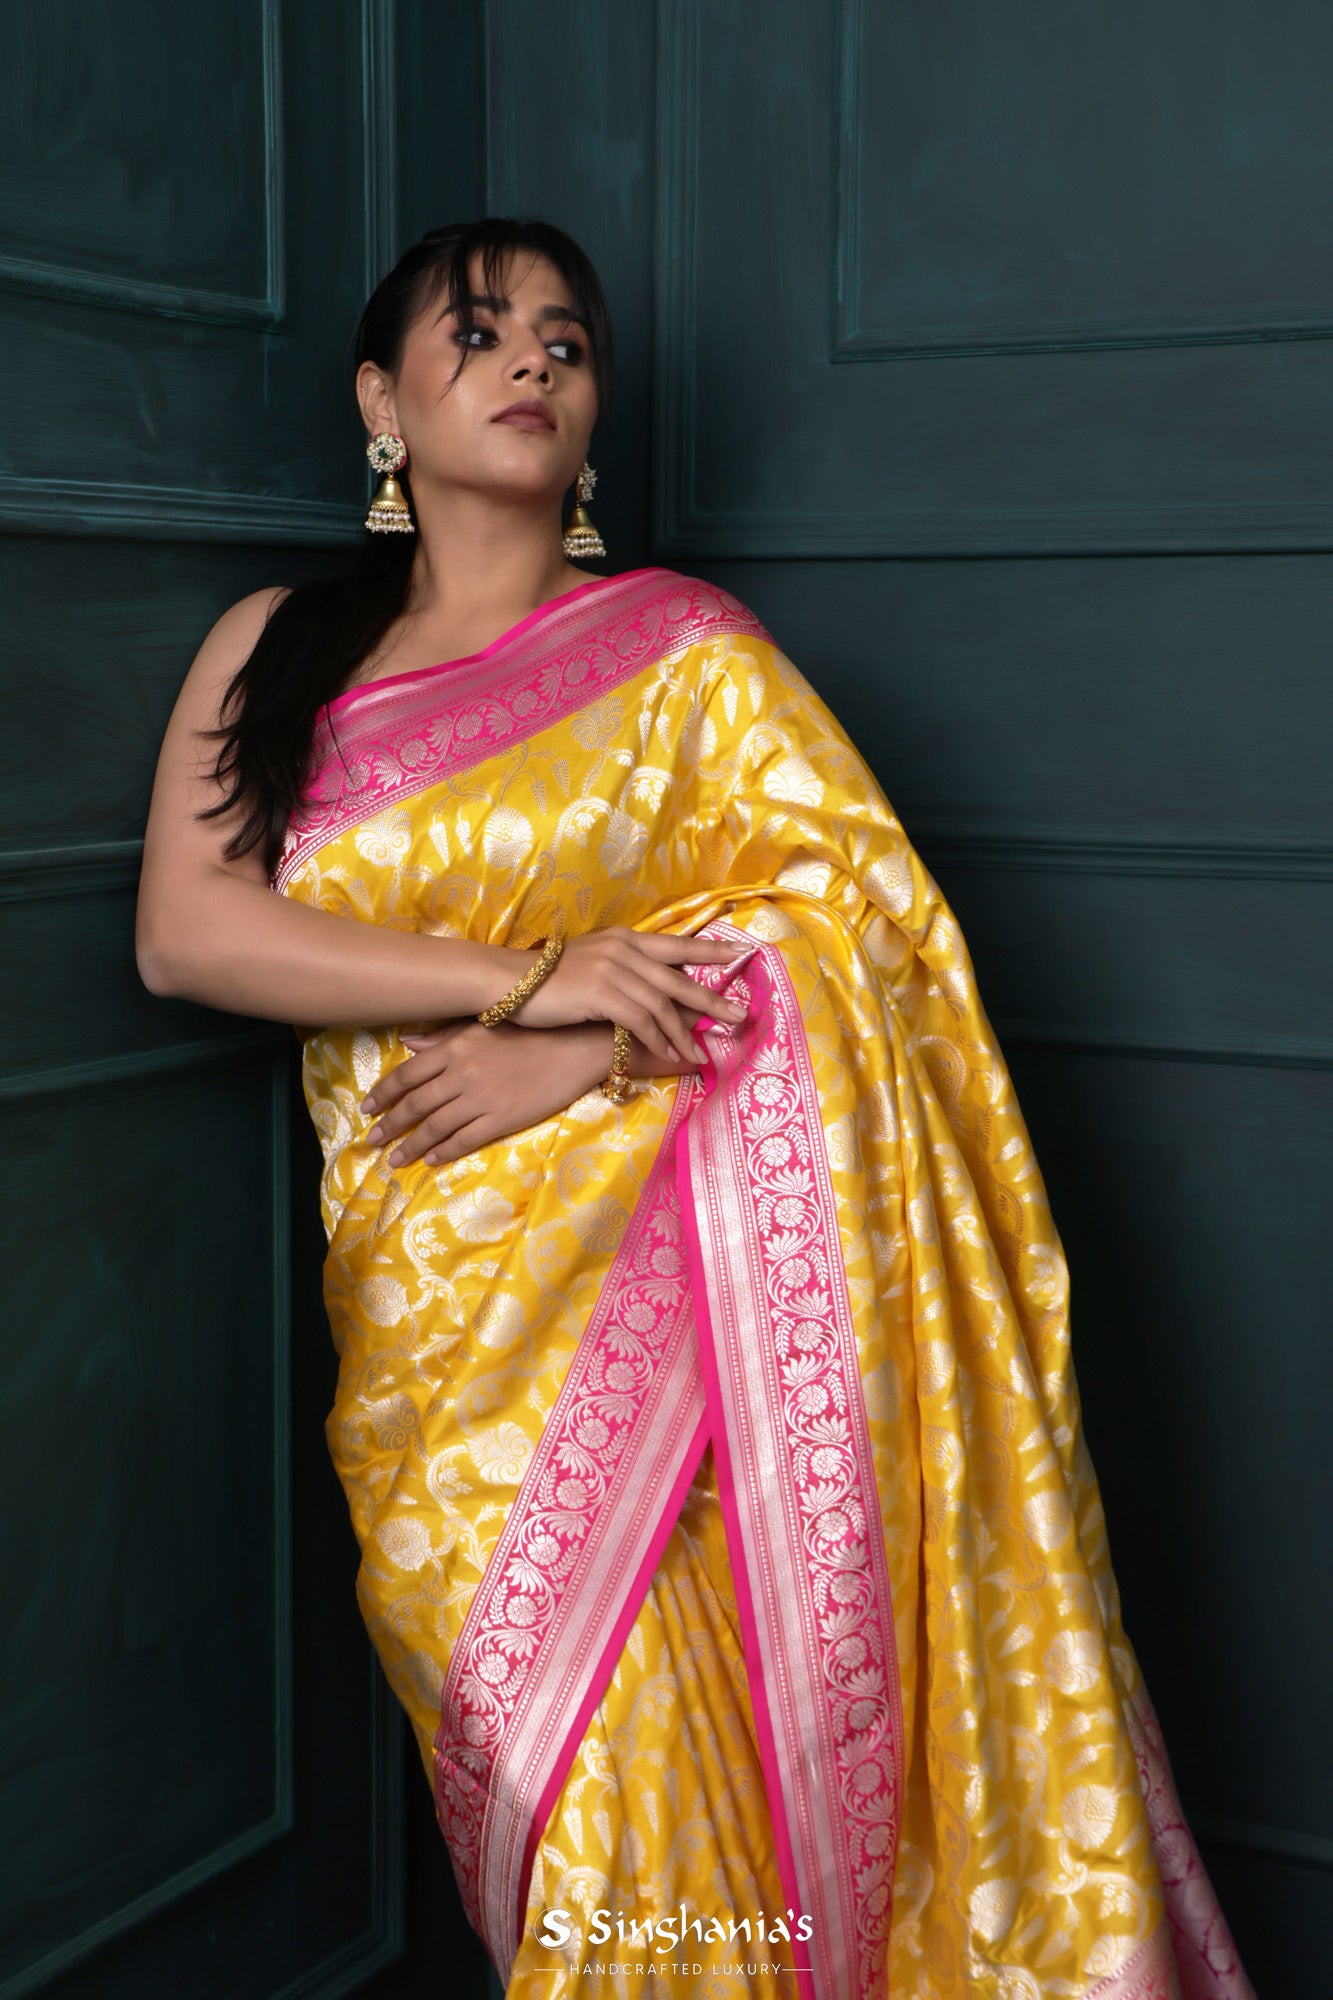 Banarasi Silk Zari Work The entire body is covered in a woven jaal